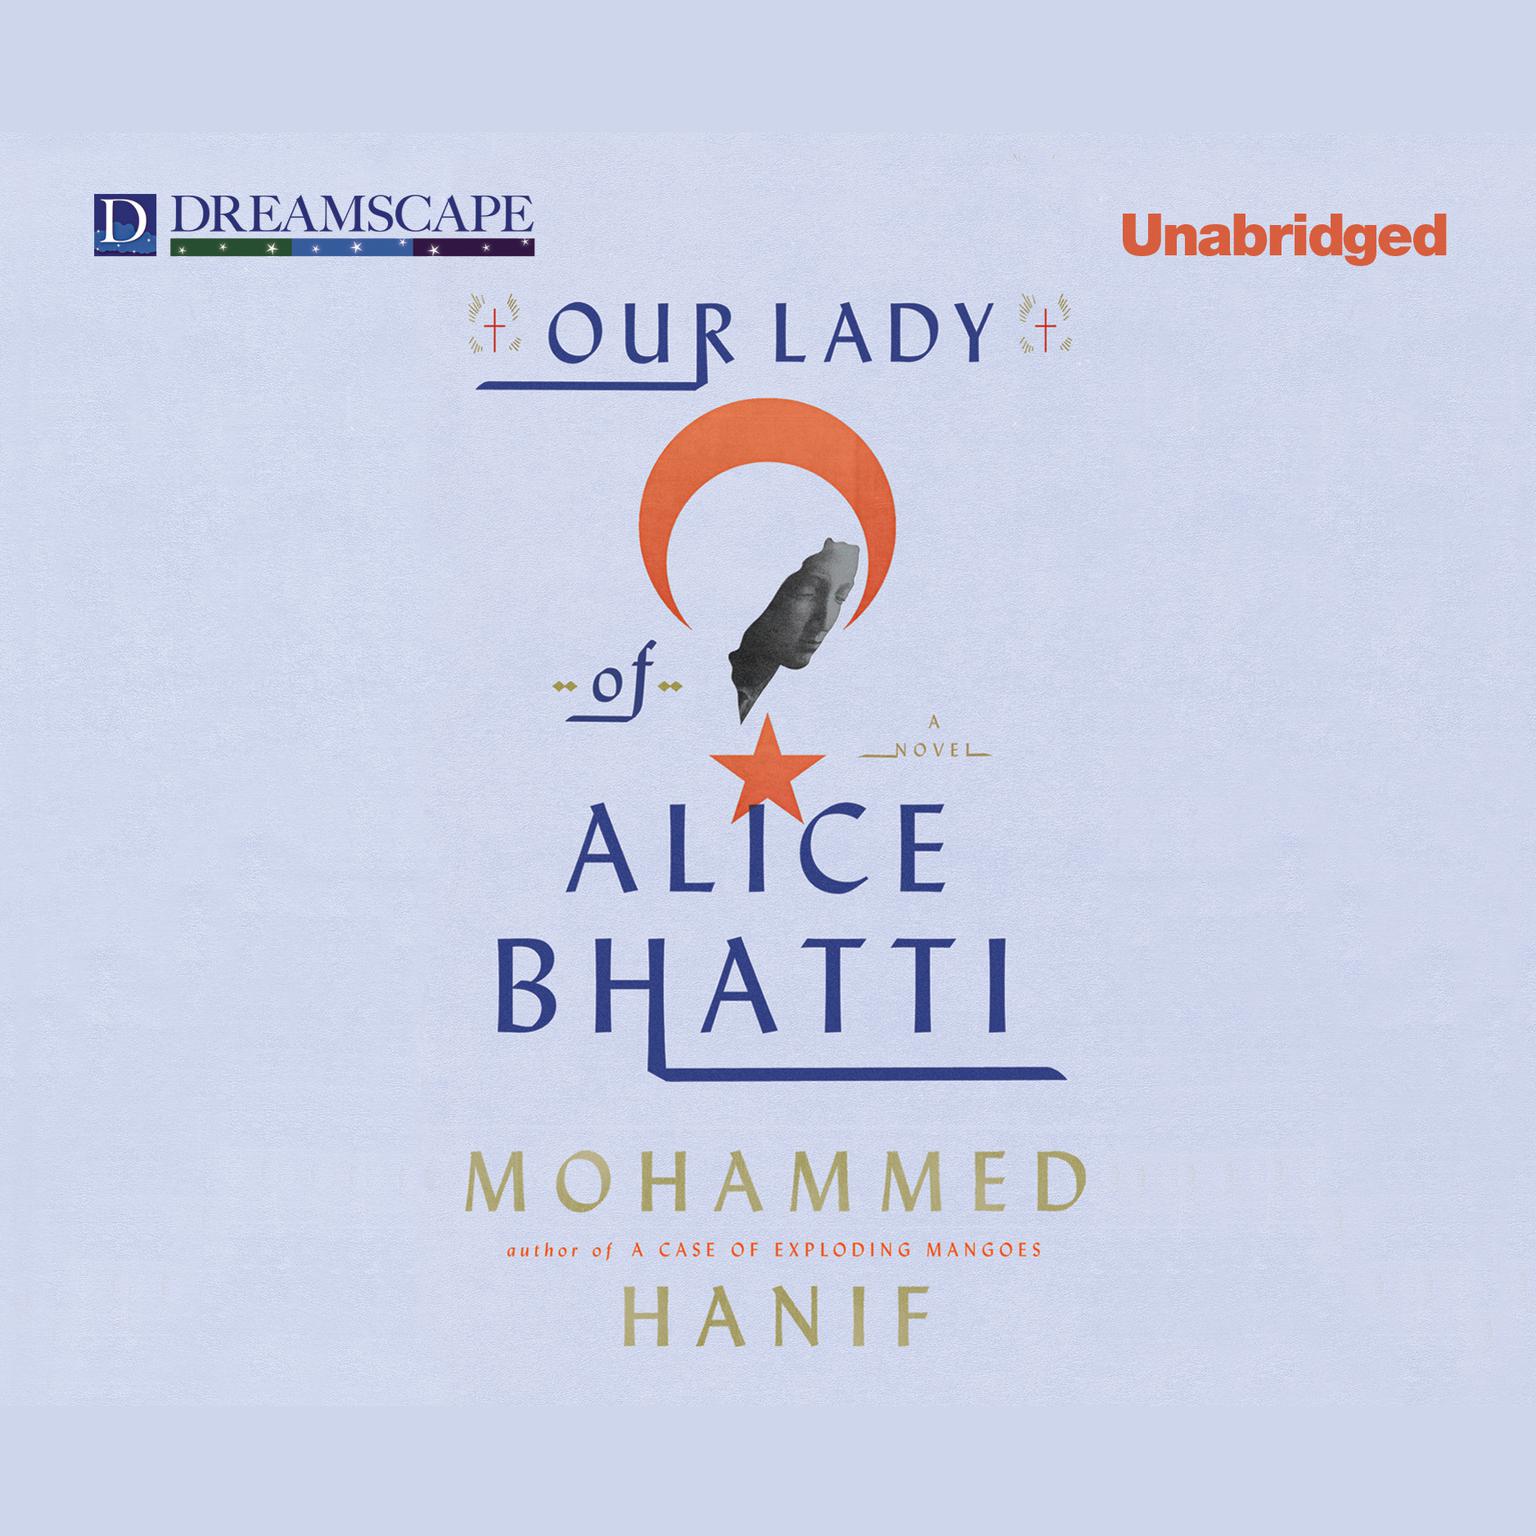 Our Lady of Alice Bhatti Audiobook, by Mohammed Hanif